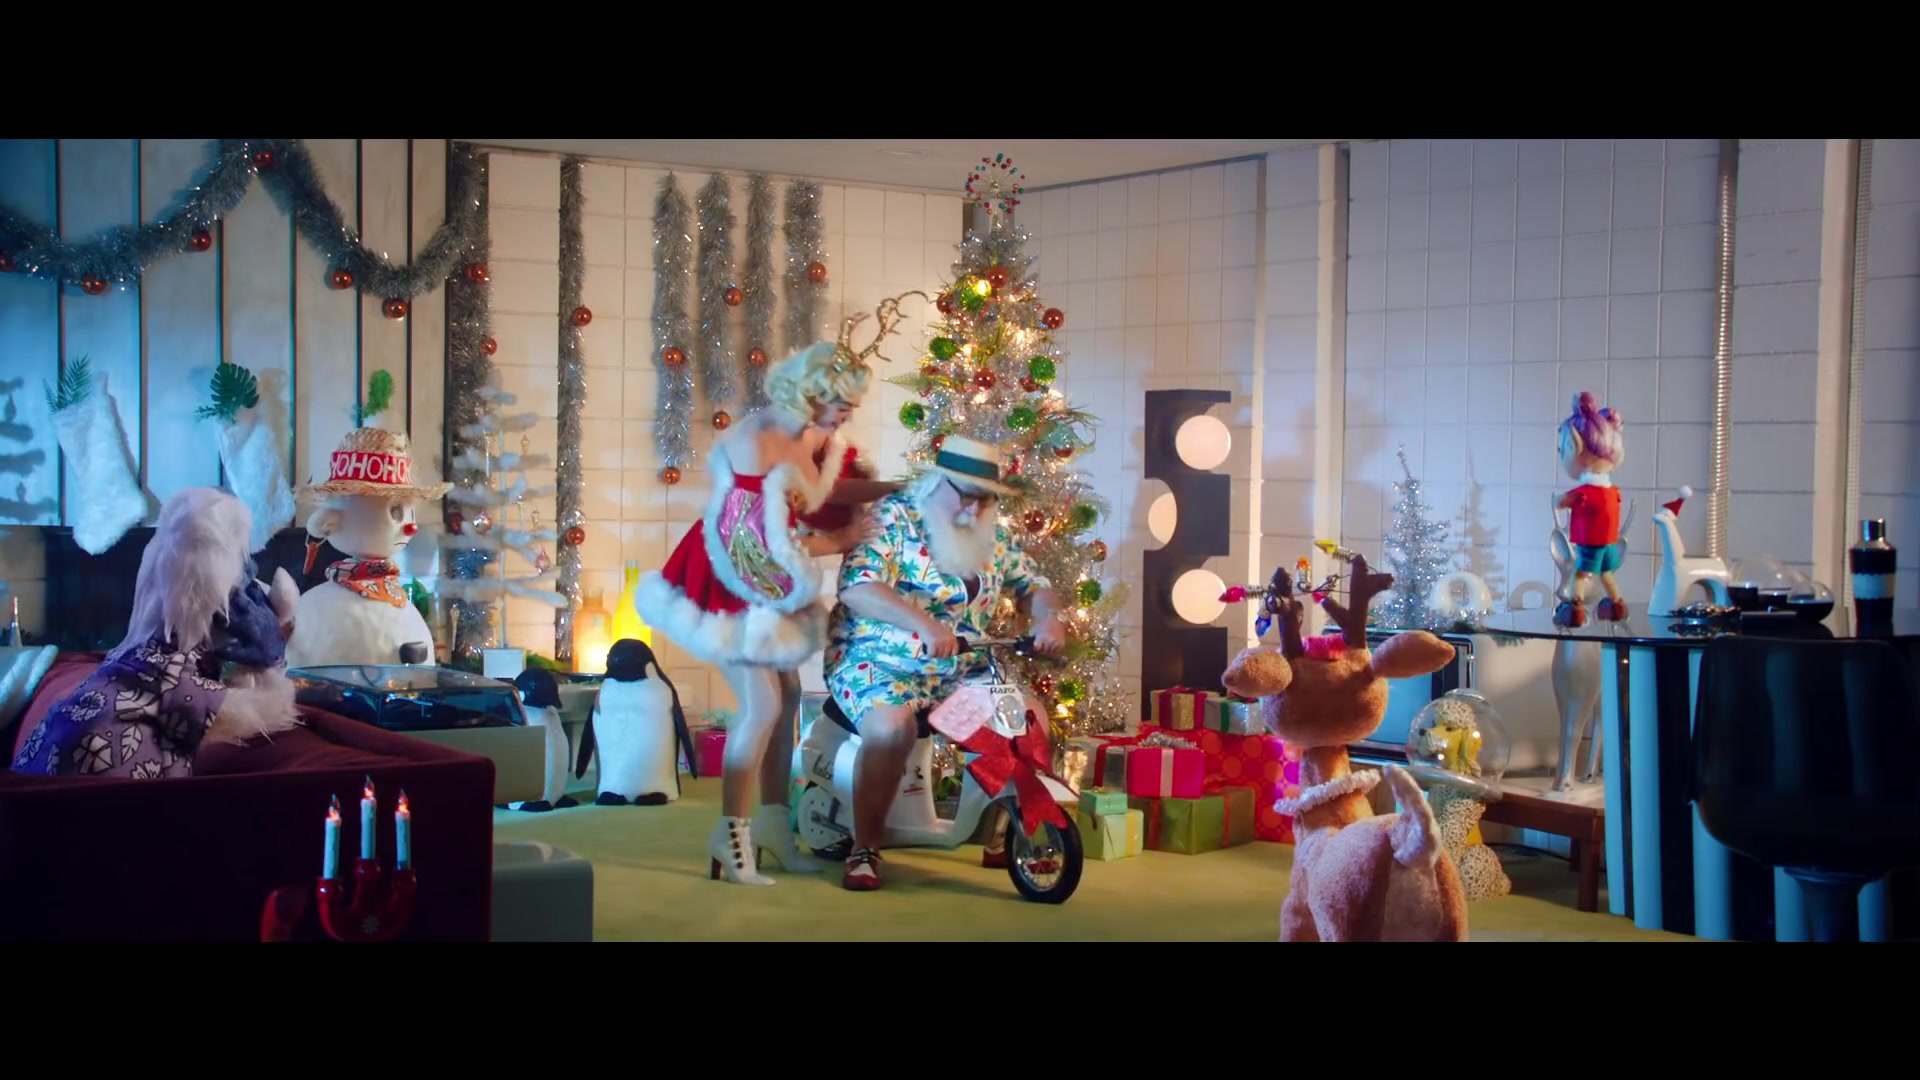 Razor Electric Scooter in "Cozy Little Christmas" by Katy Perry (2019)